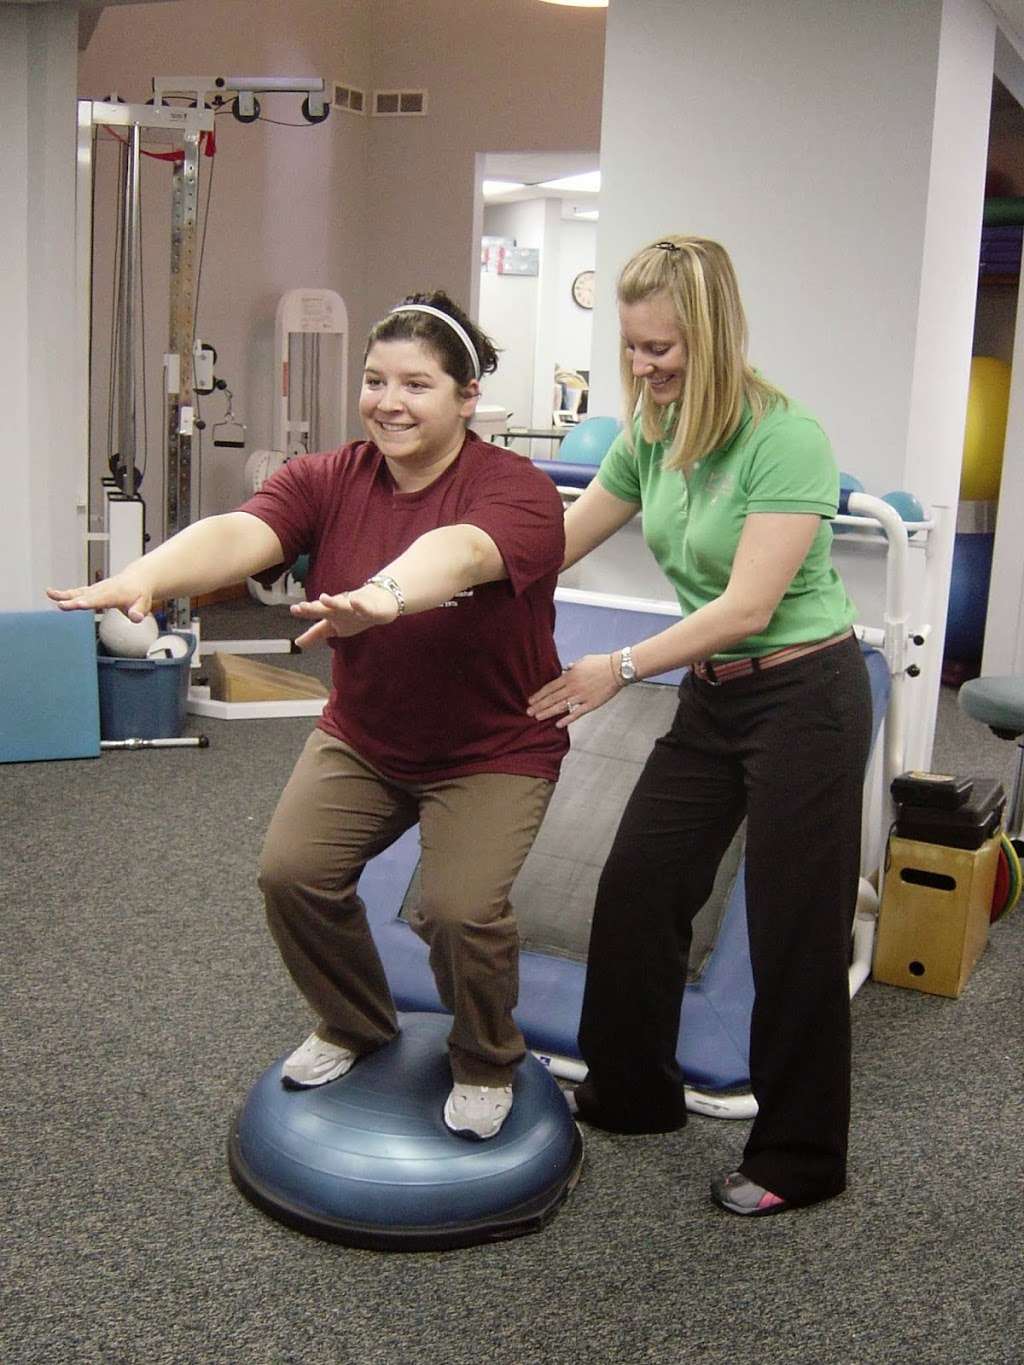 Ptsir-Physical Therapy | 17236 S Harlem Ave, Tinley Park, IL 60477, USA | Phone: (708) 633-8379